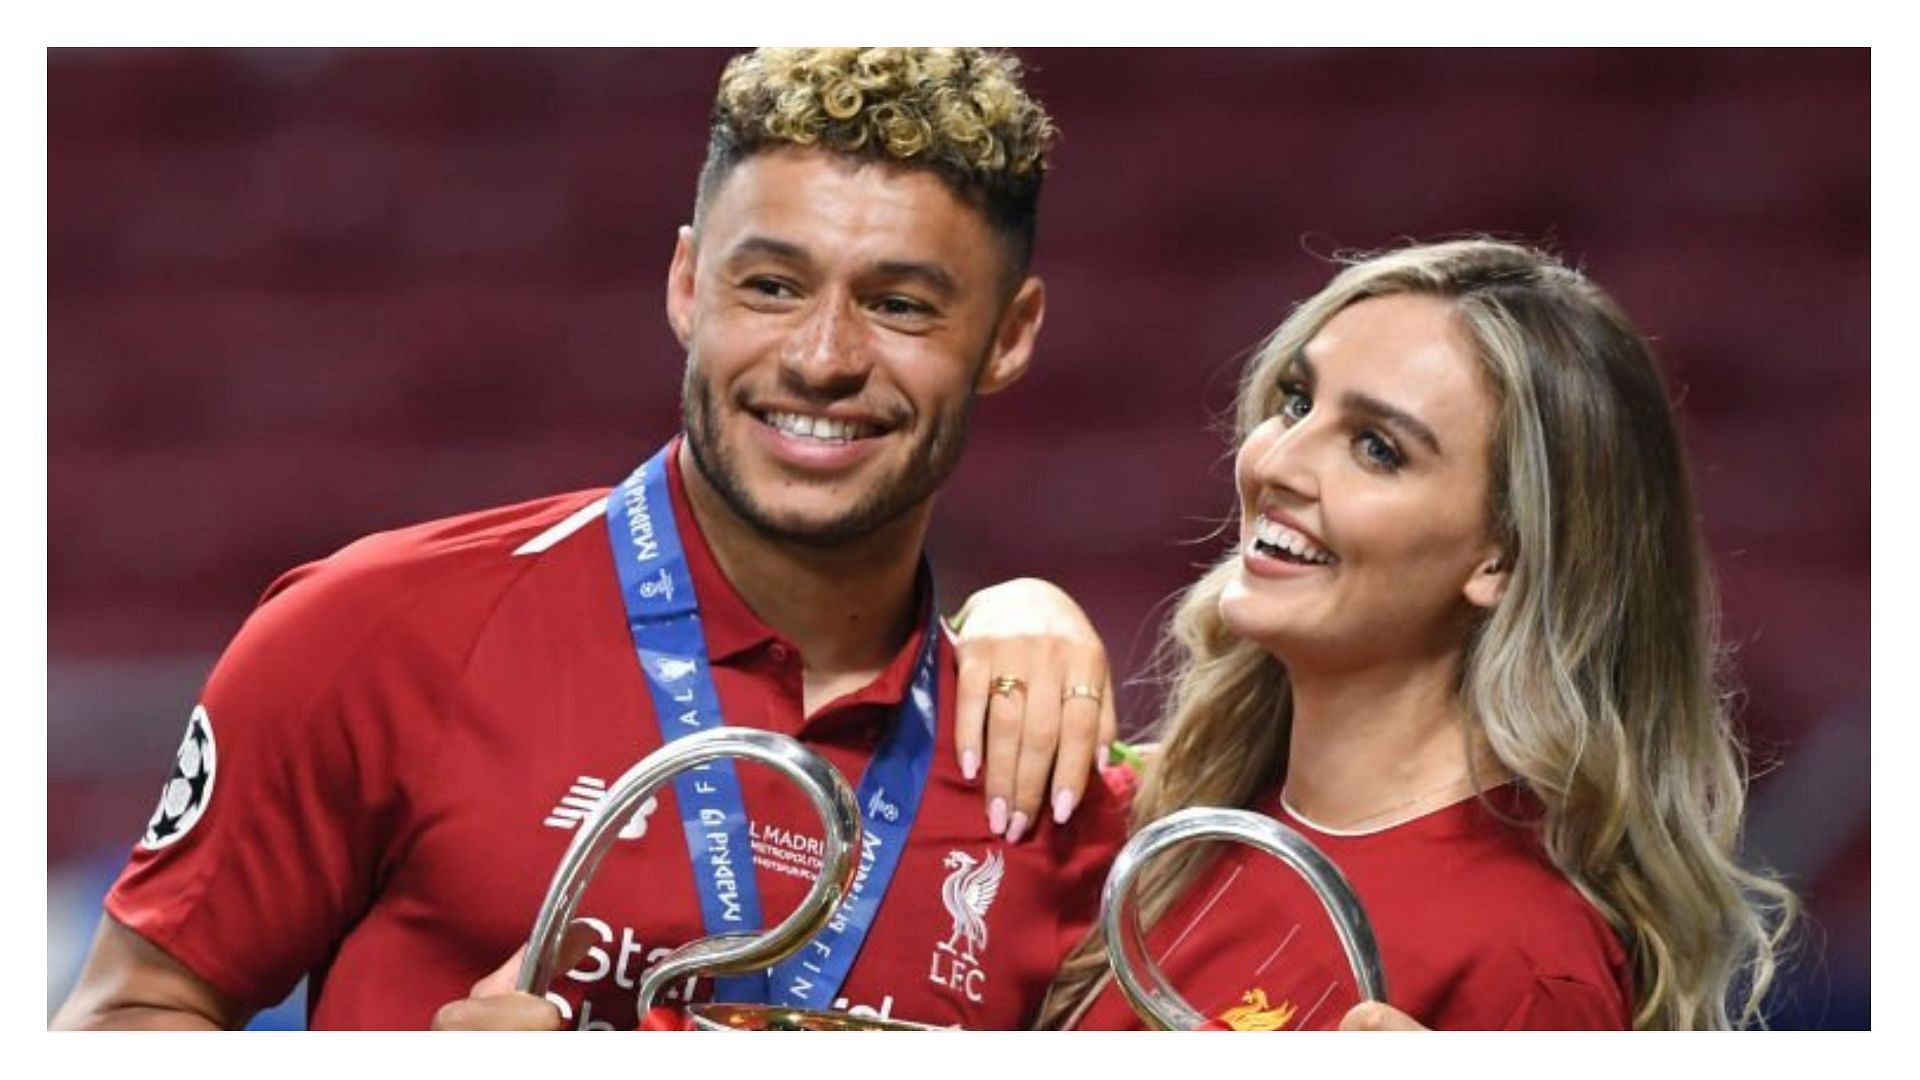 Alex Oxlade-Chamberlain and Perrie Edwards are now engaged (Image via Michael Regan/Getty Images)